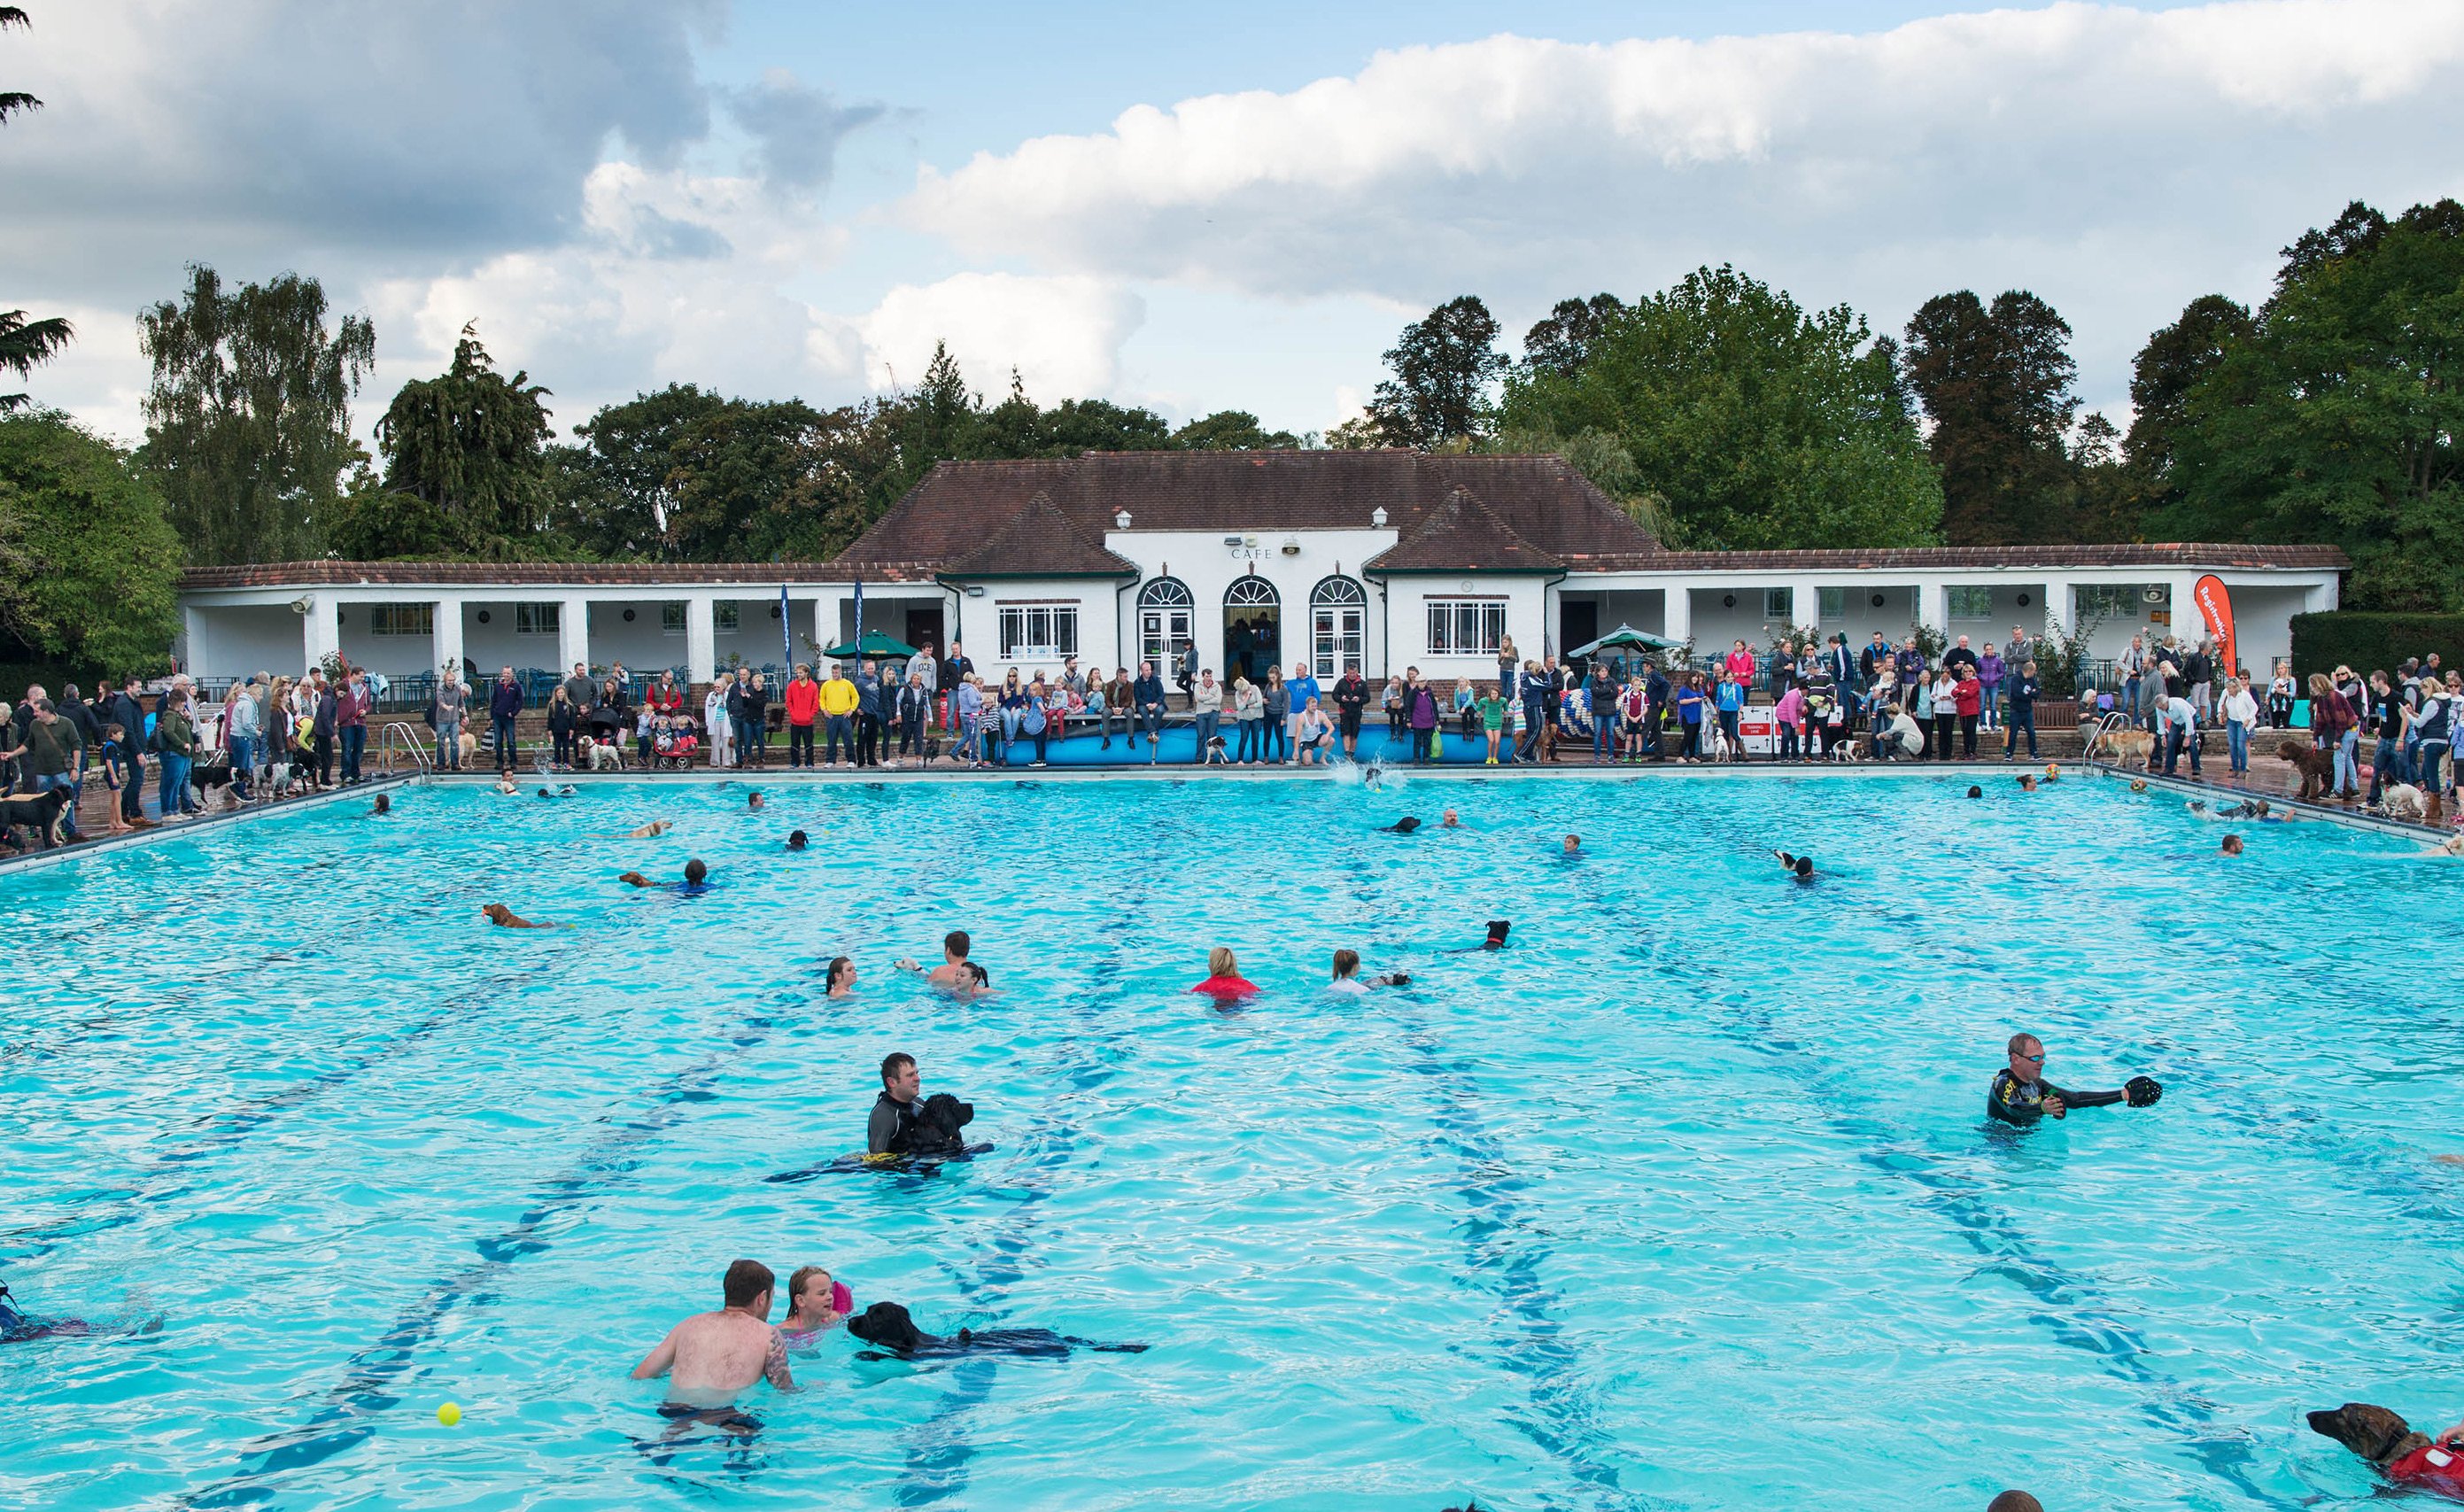 People and dogs swimming in an outdoor swimming pool